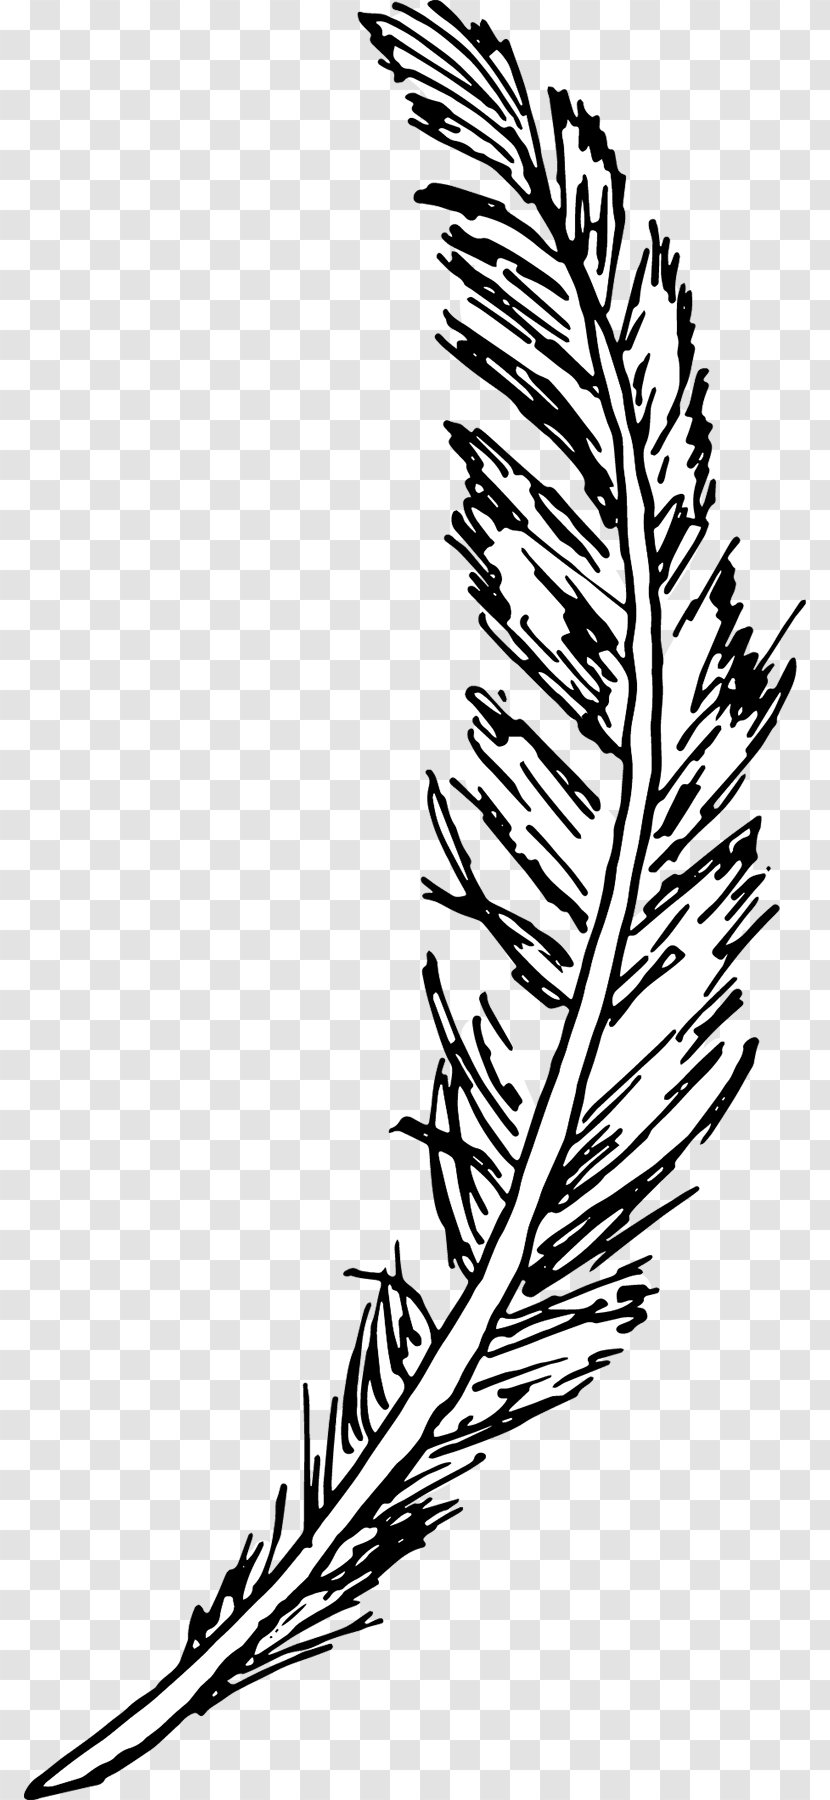 Line Art Drawing Feather Bird Sketchbook - Flora - Falling Feathers Transparent PNG